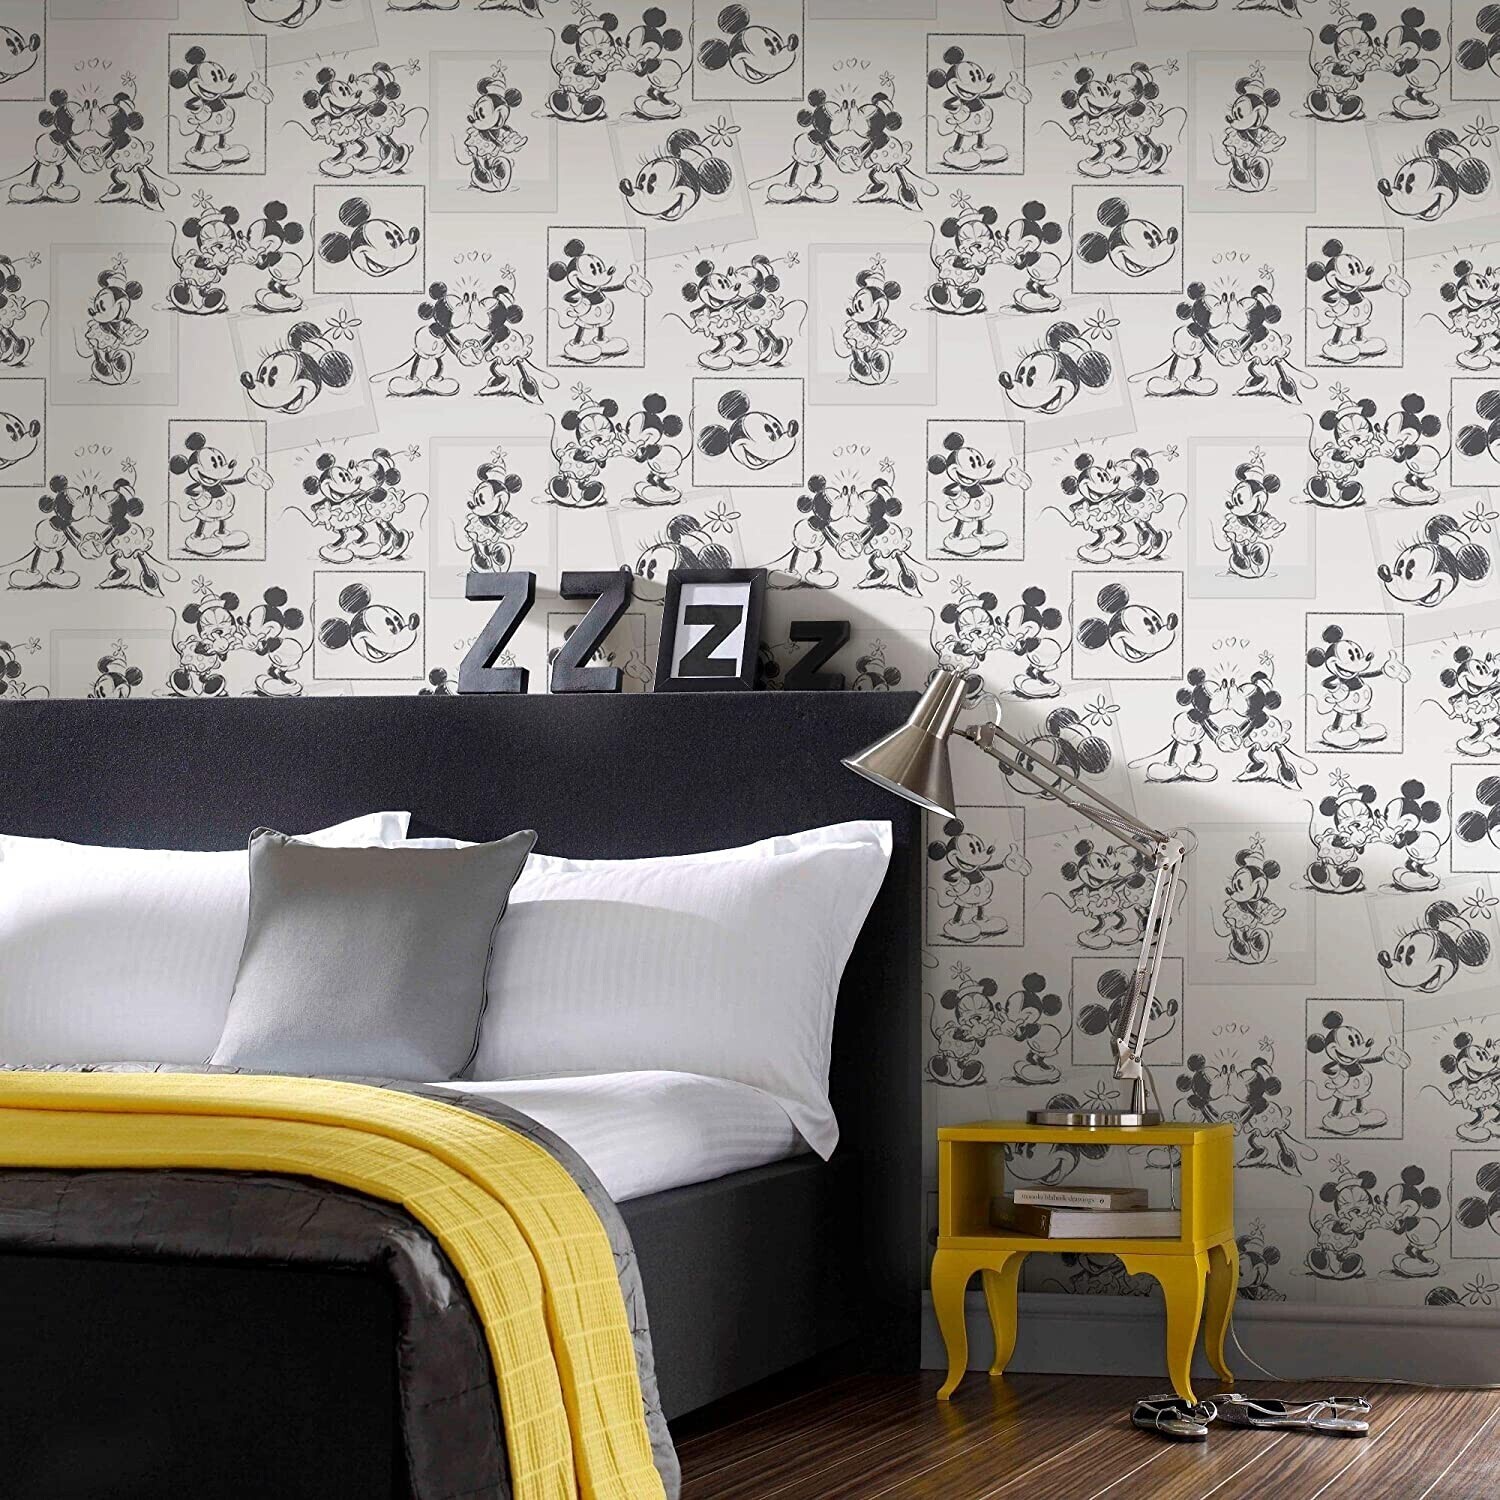 Buy Disney Mickey And Minnie Black/White Sketch Wallpaper from £16.99  (Today) – Best Deals on